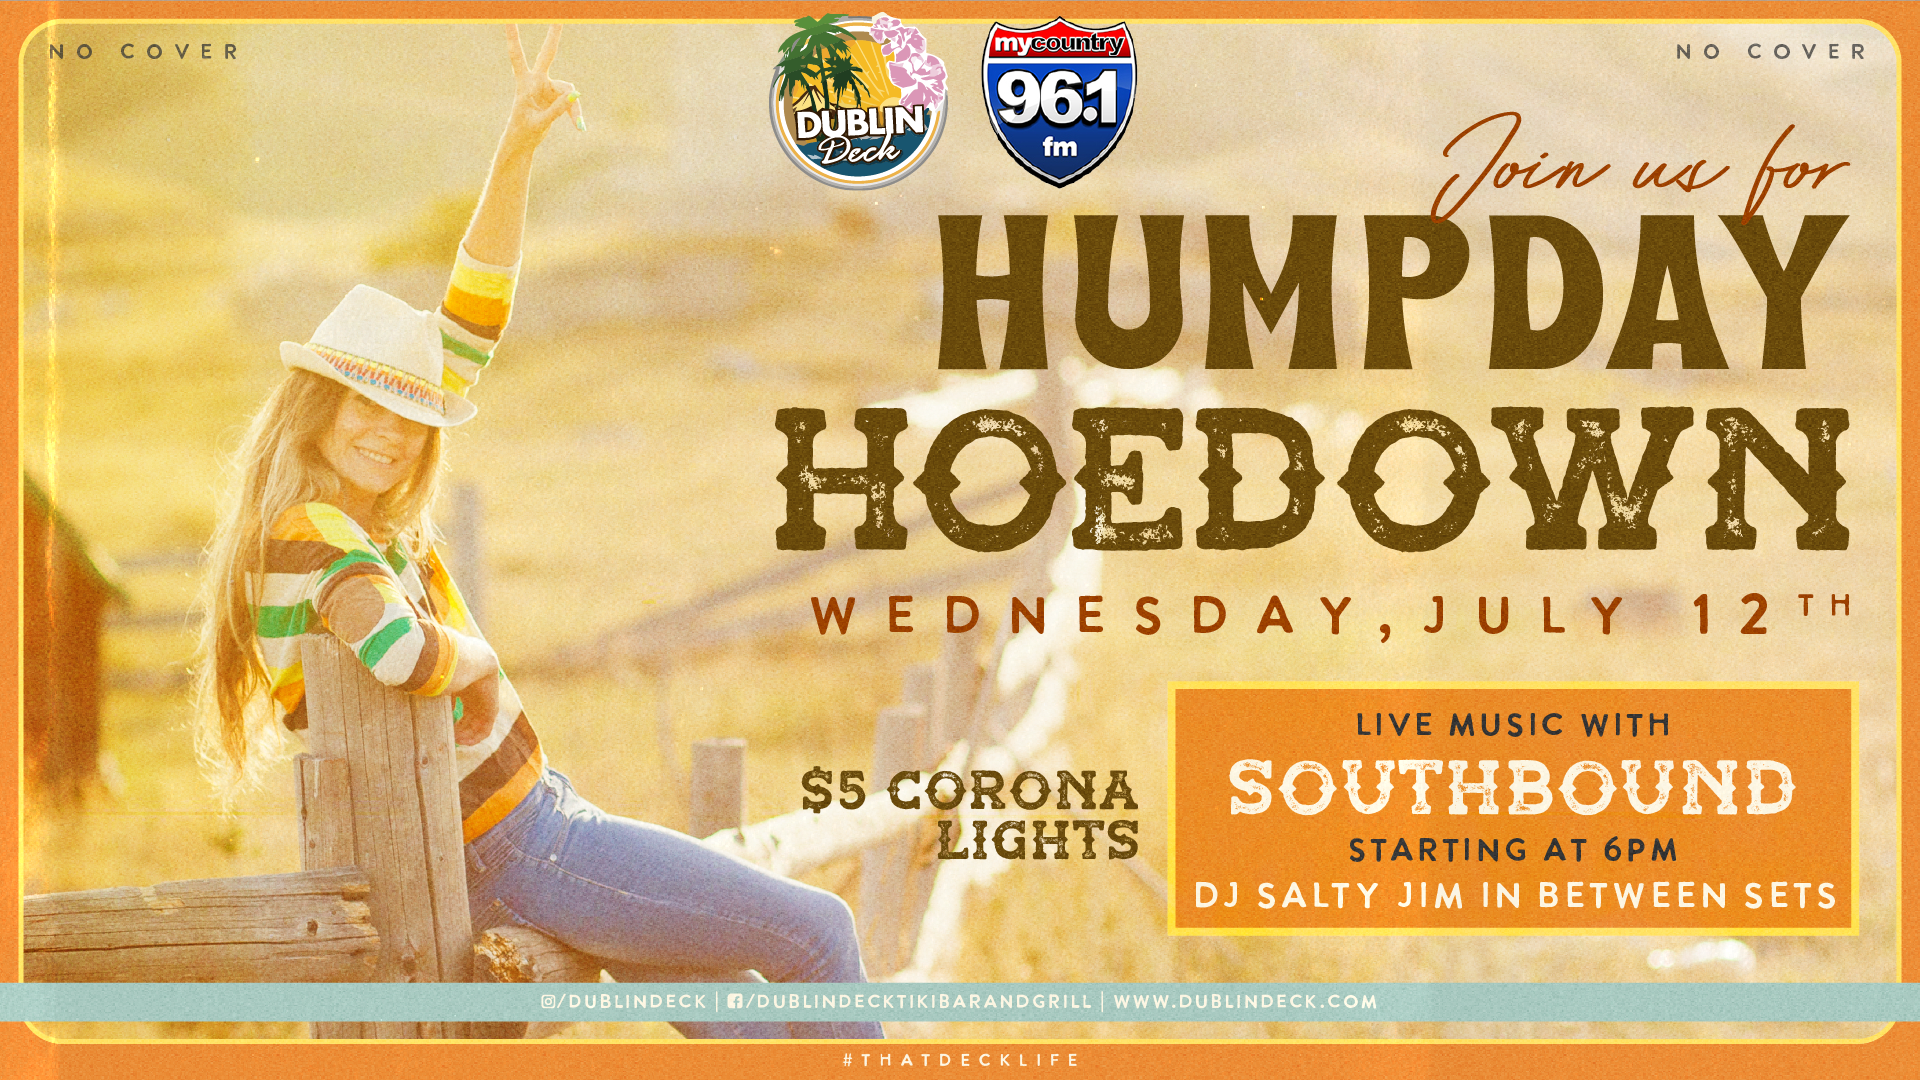 Get your cowboy boots ready for Humpday Hoedown with Southbound! Music begins at 6PM